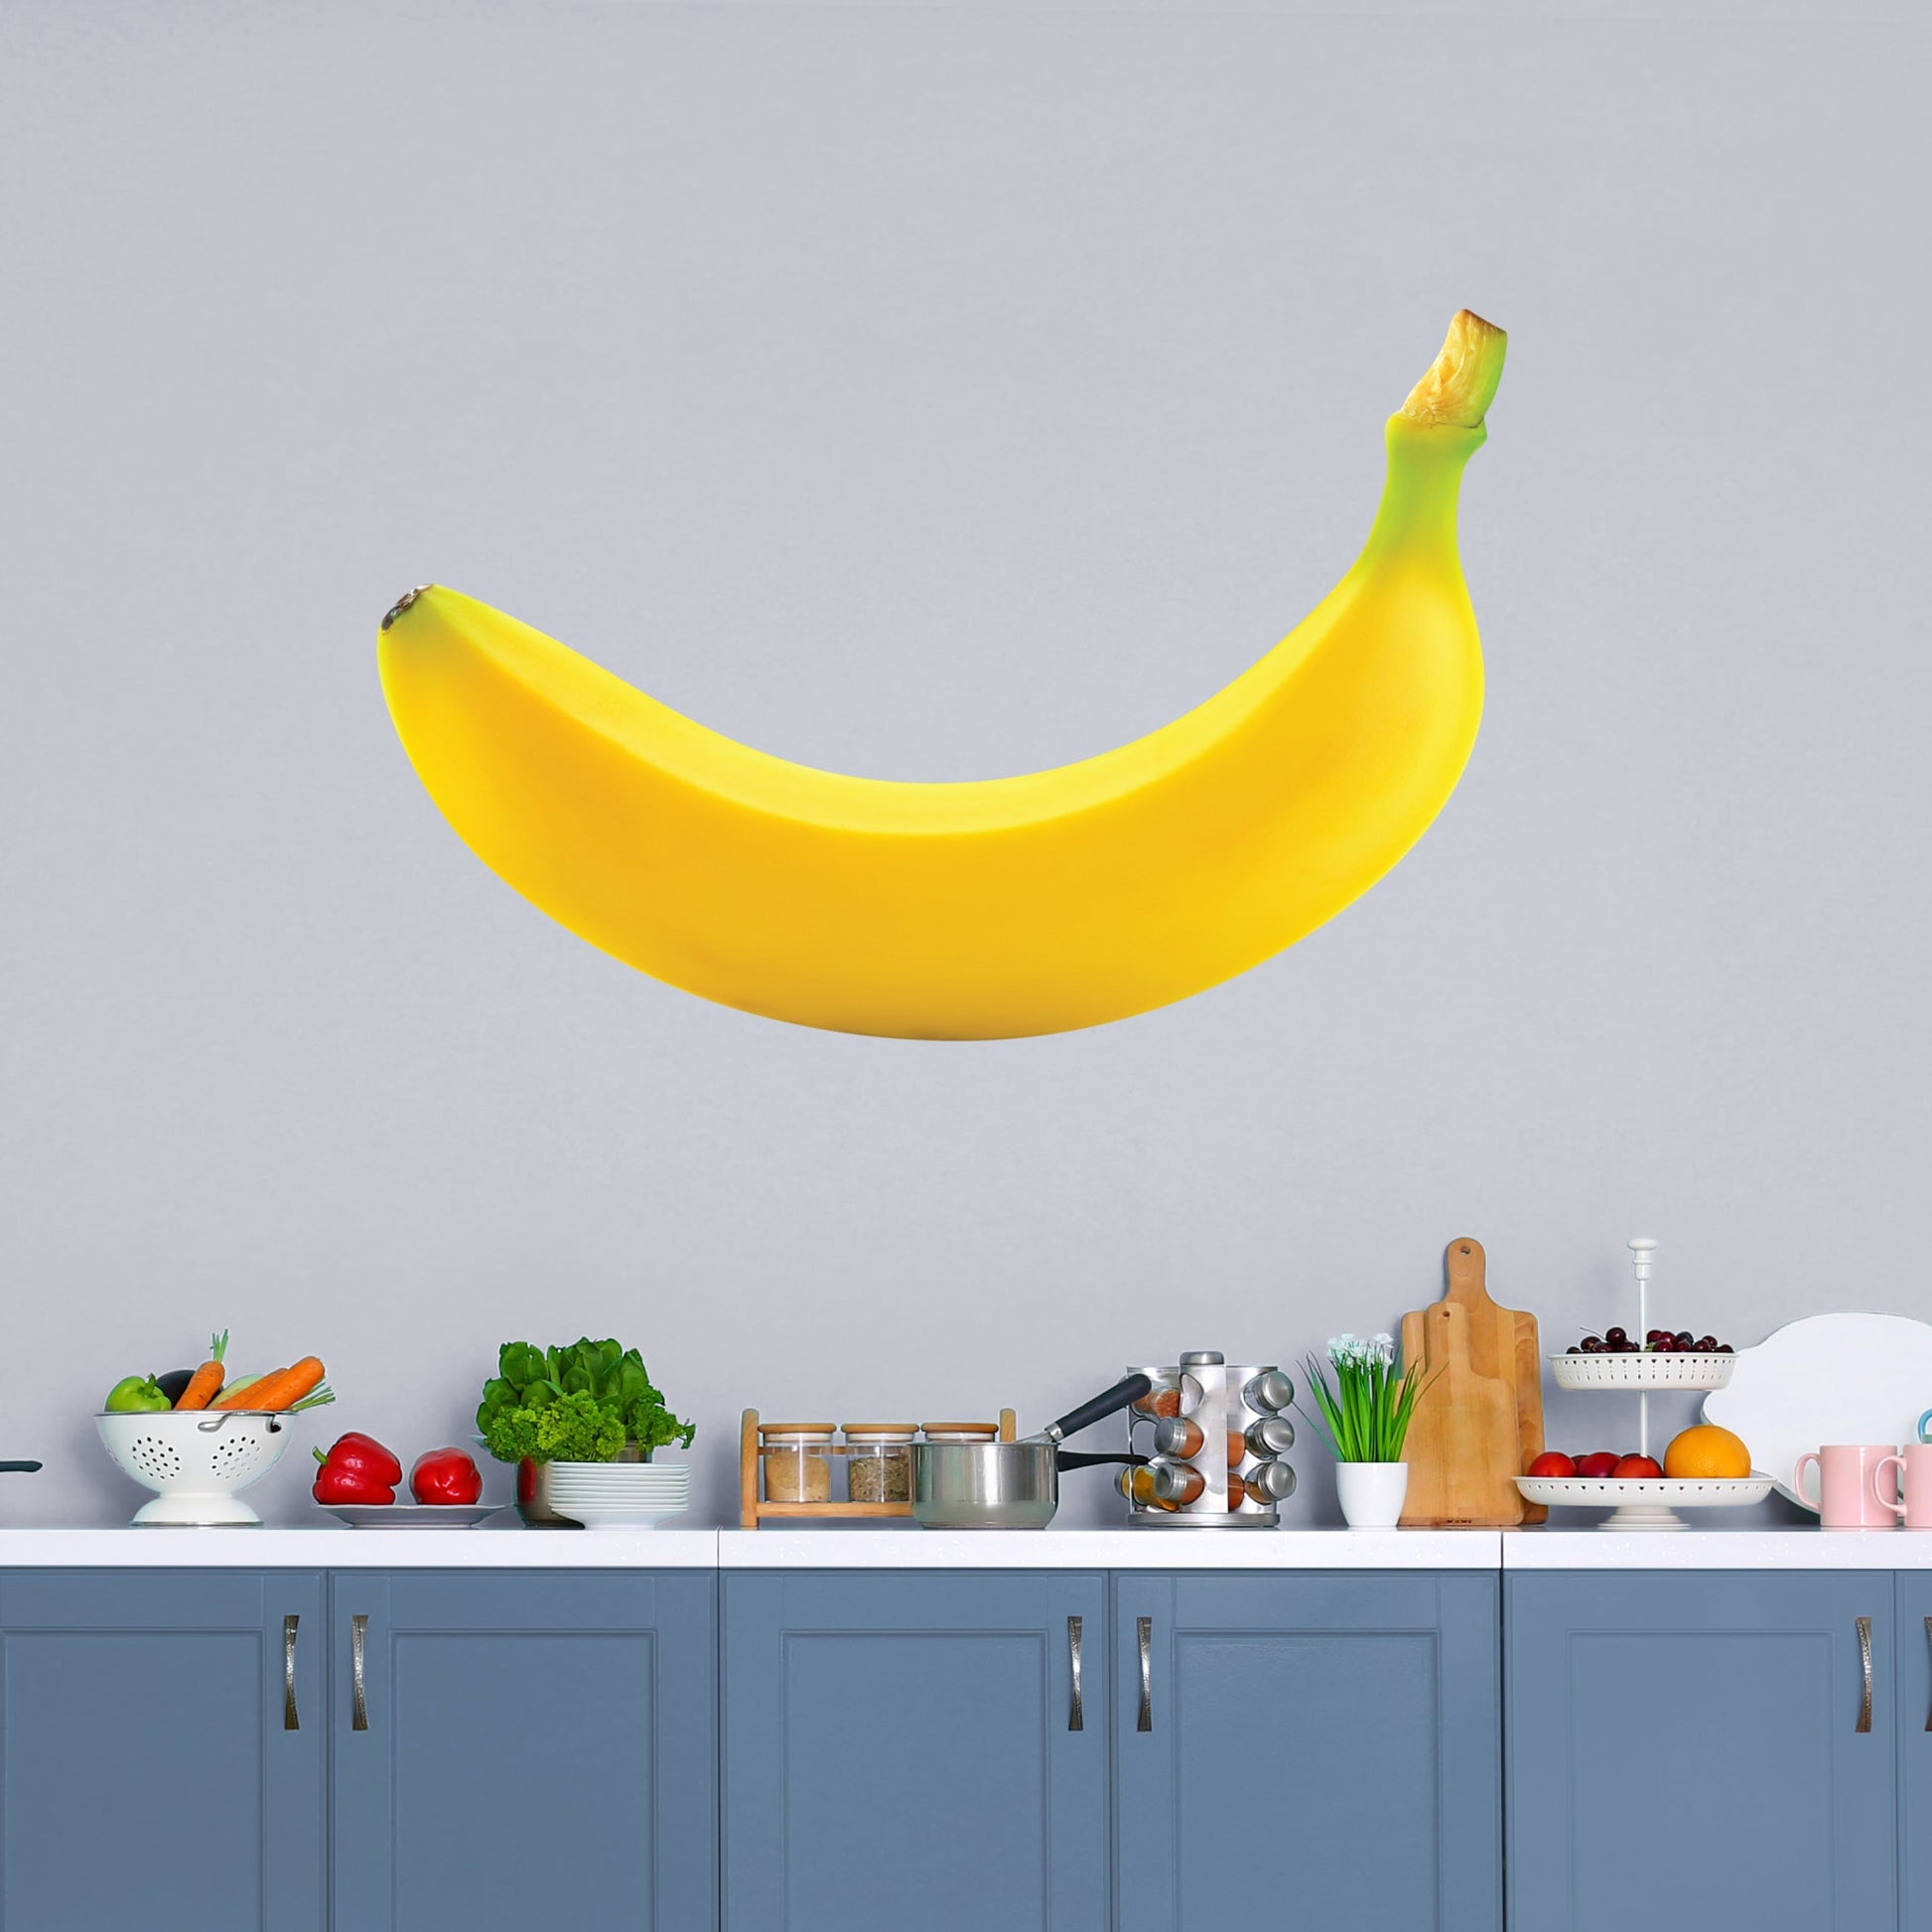 Giant Banana + 2 Decals (50"W x 32"H)